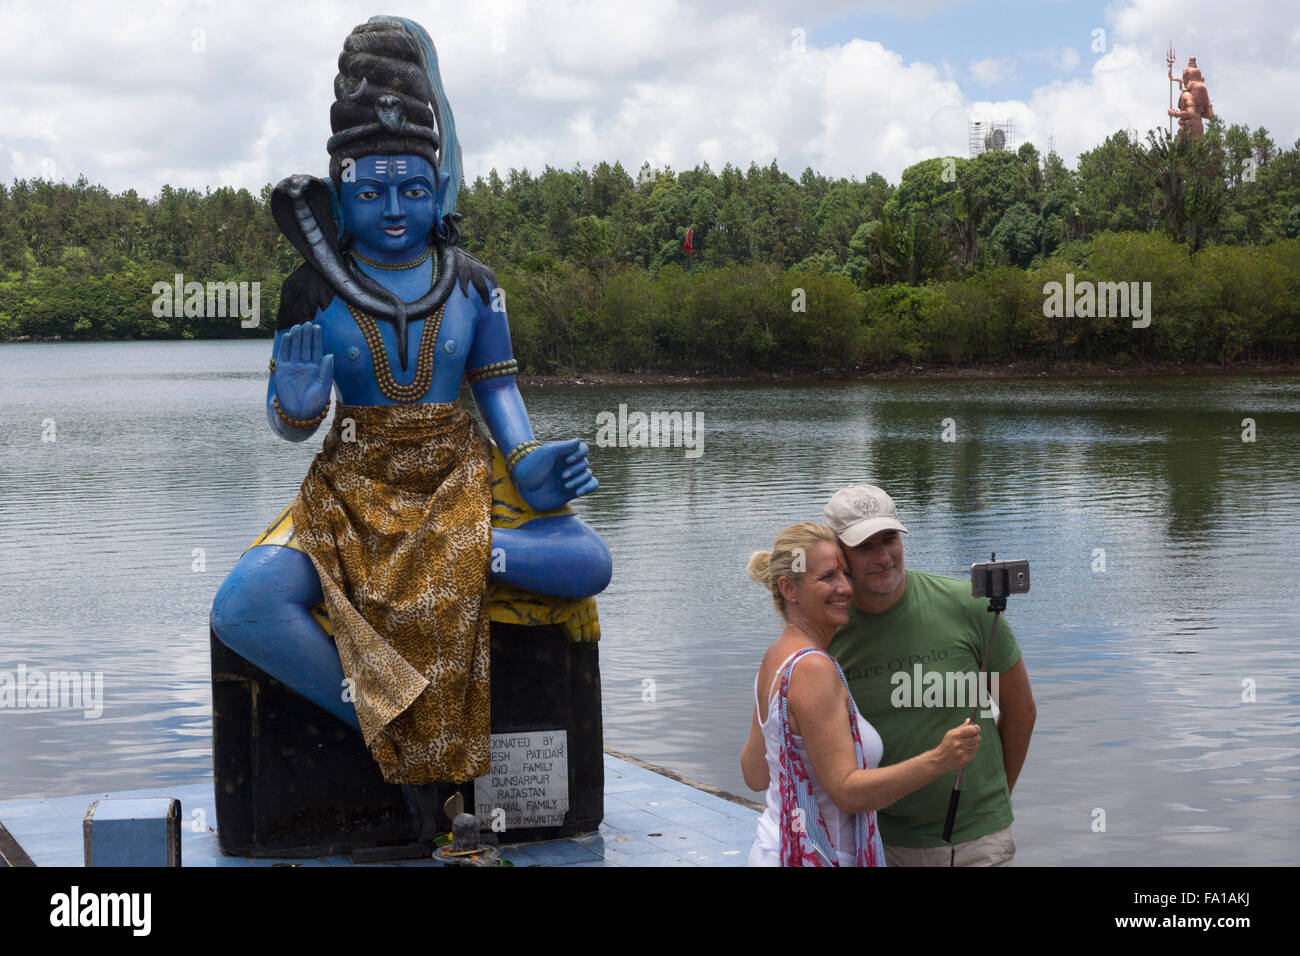 A couple taking a selfie using a selfie stick in front of the Hindu god Shiva at Ganga Talao - Hindu pilgrimage site Stock Photo